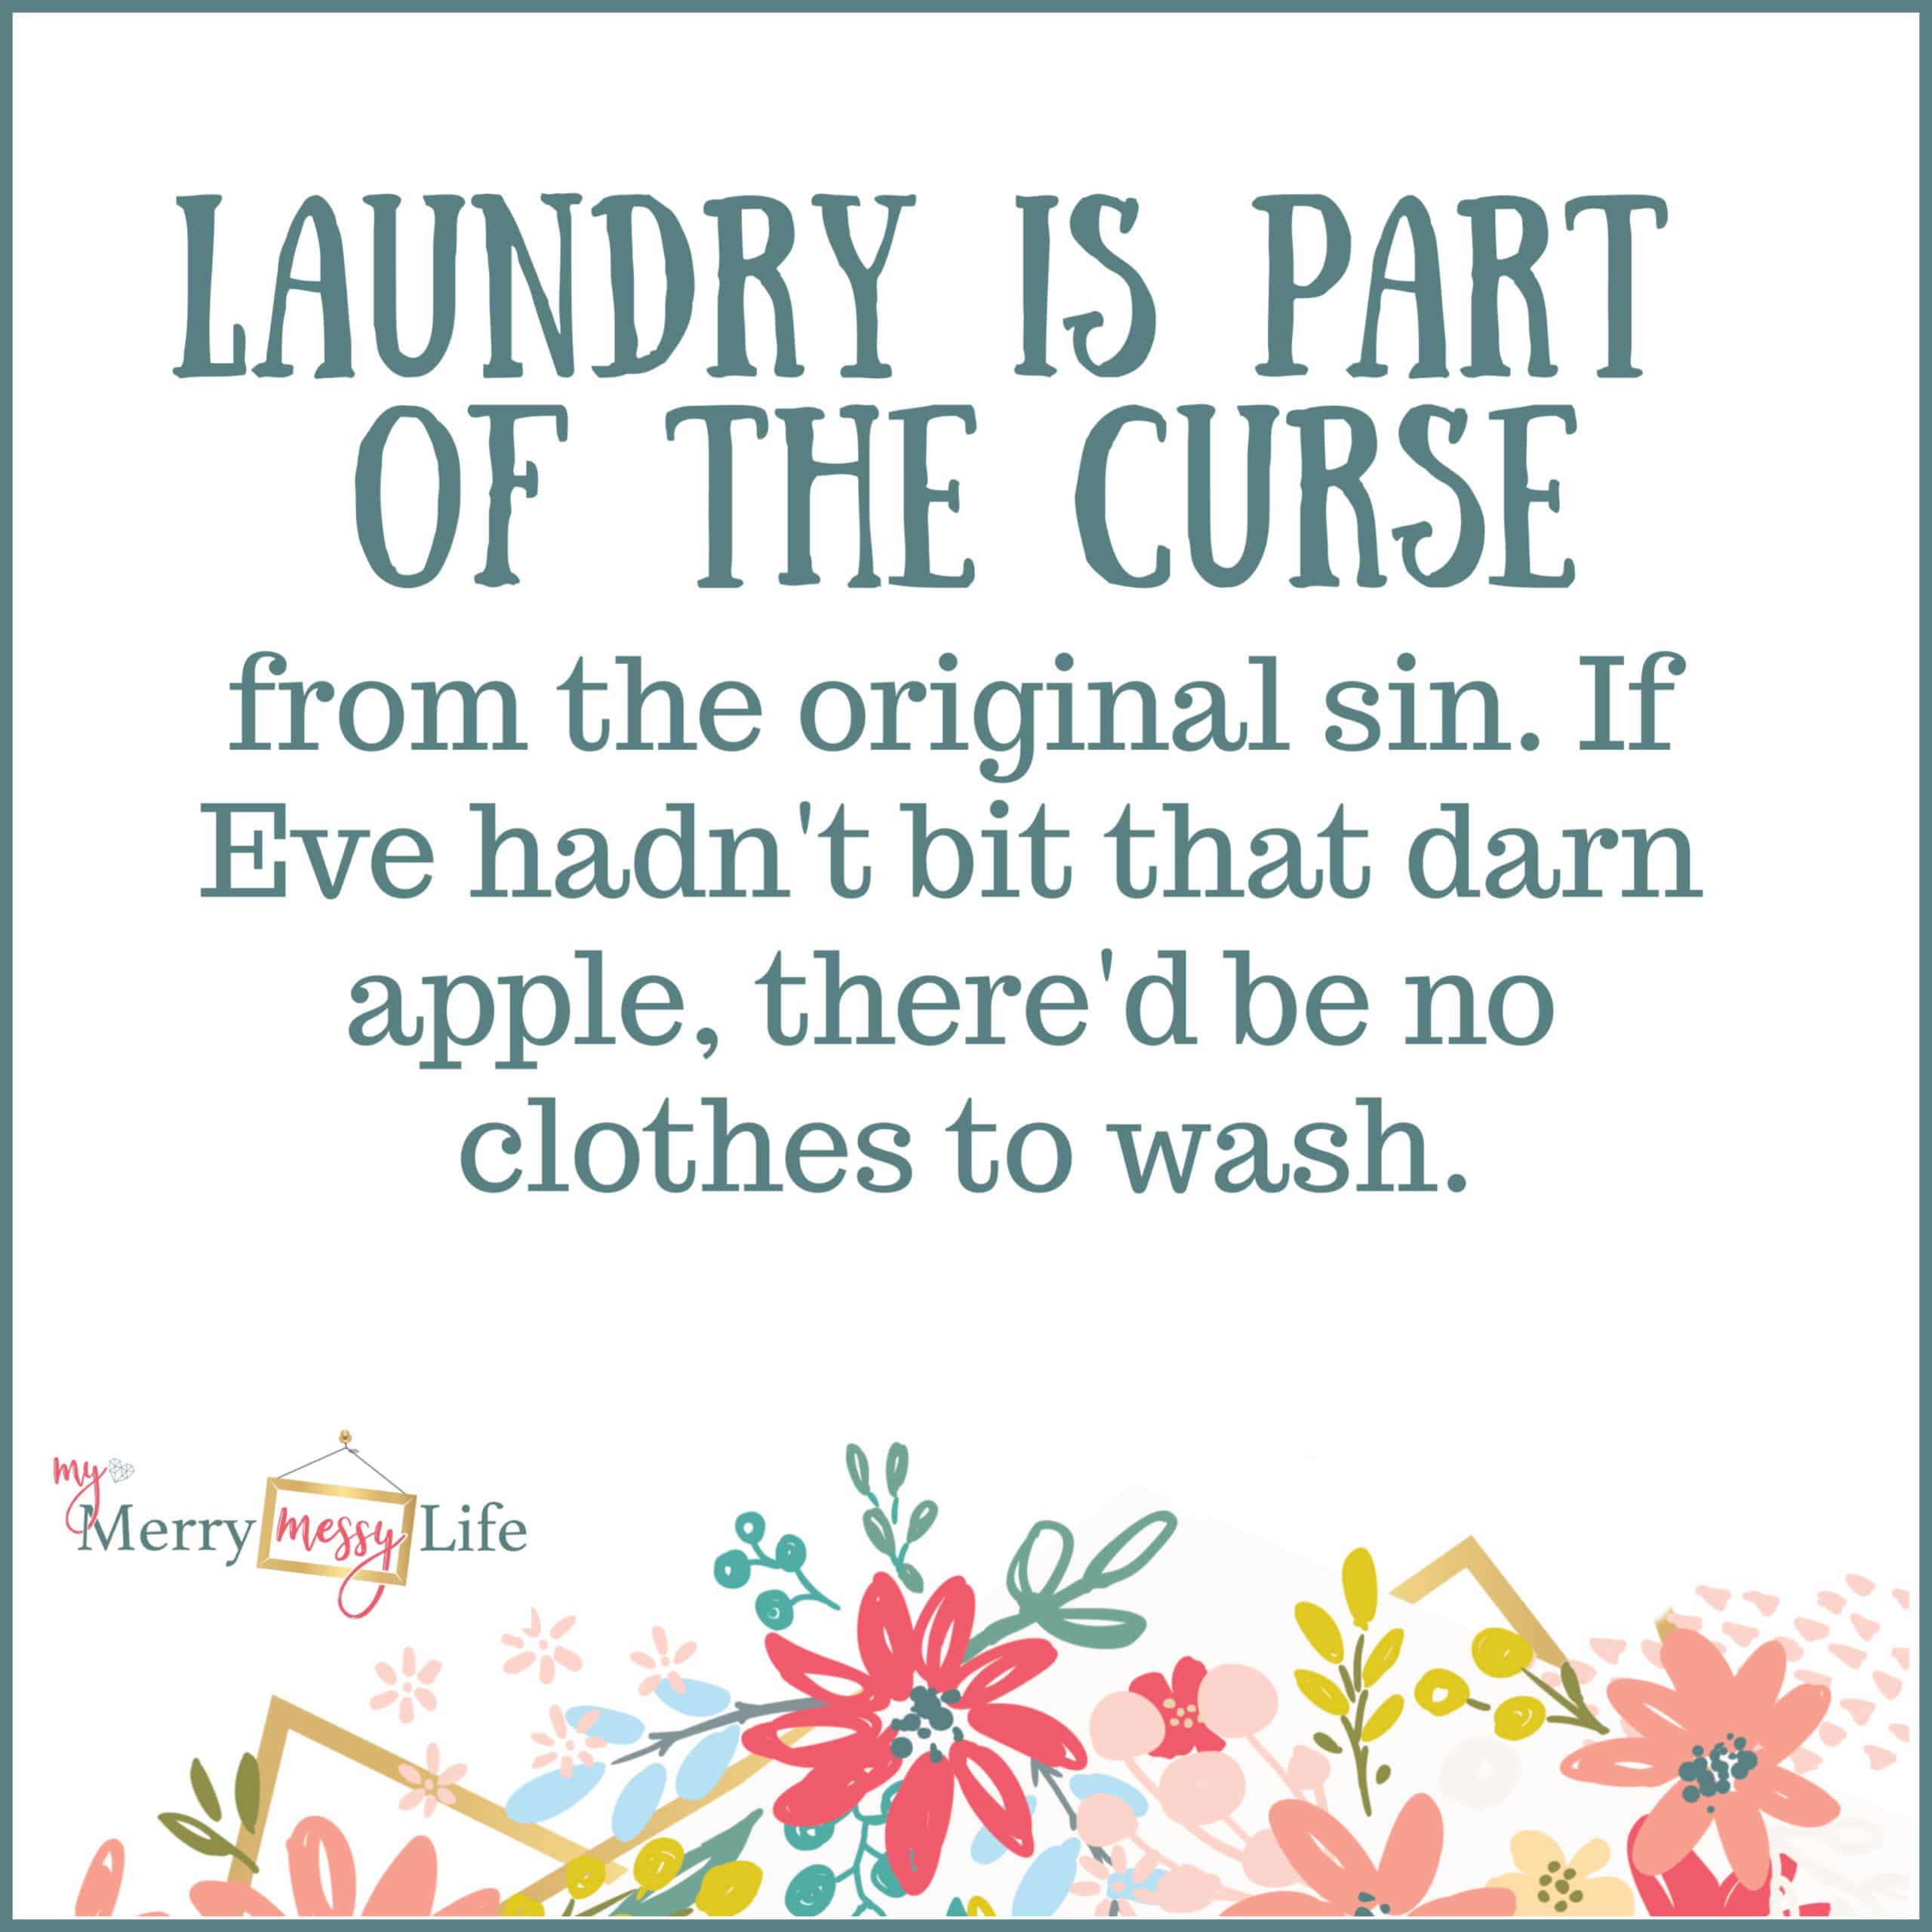 Funny Mom Memes about Laundry